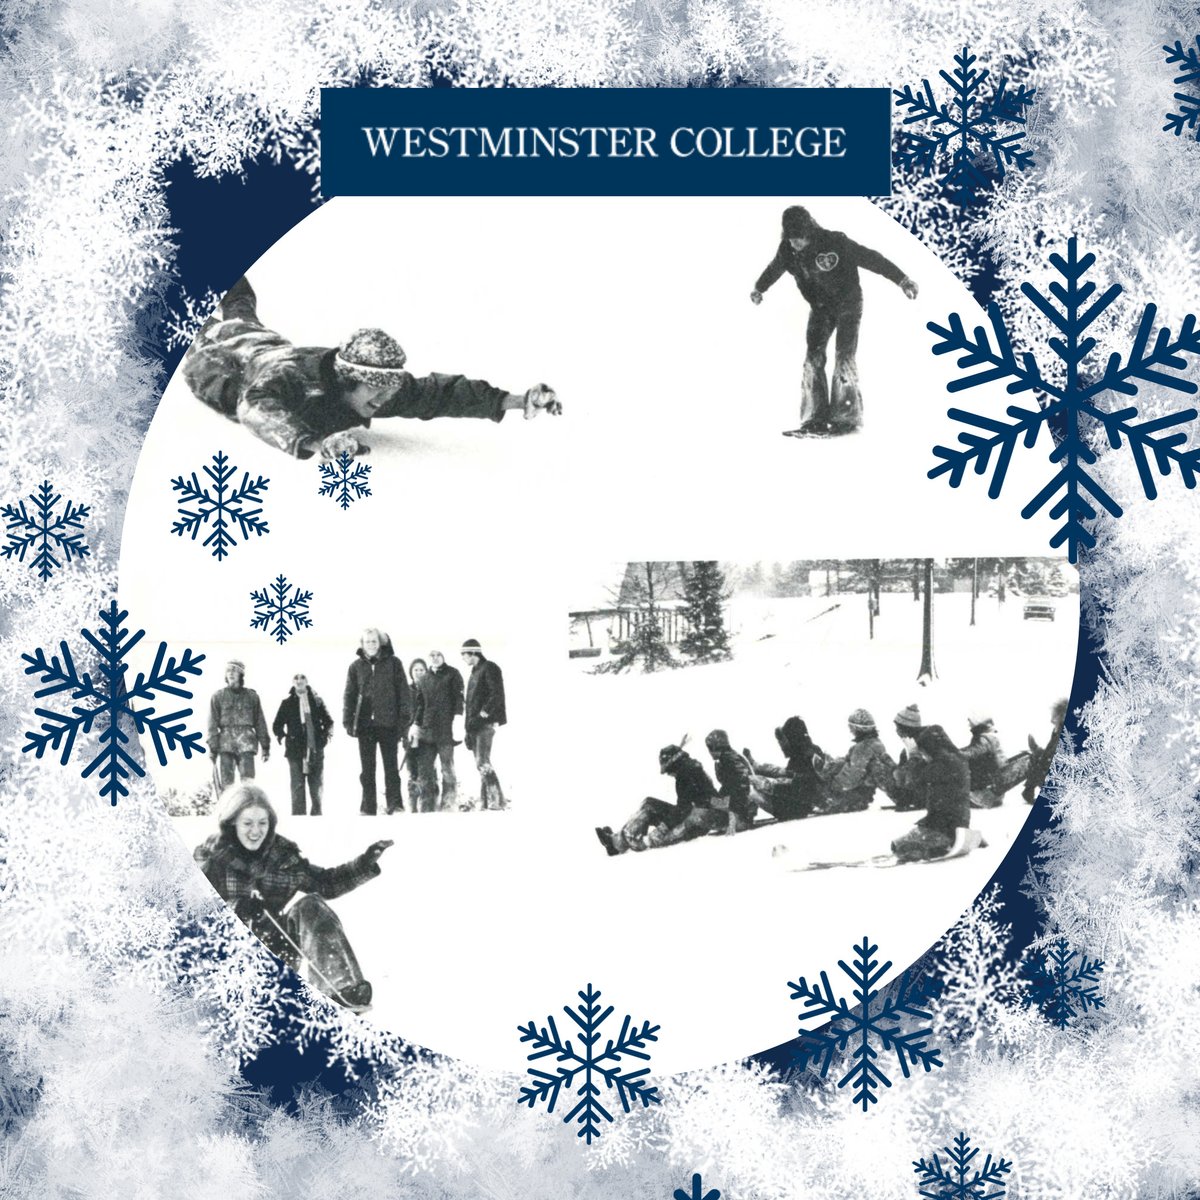 #Happy2024, Titans! Homecoming 2024 on October 19 will be snow ❄️ much fun with this great crew as we celebrate the 50th reunion of the class of 1974 later this year. The throwback sled riding pic is from the 1974 Argo. #HappyNewYear